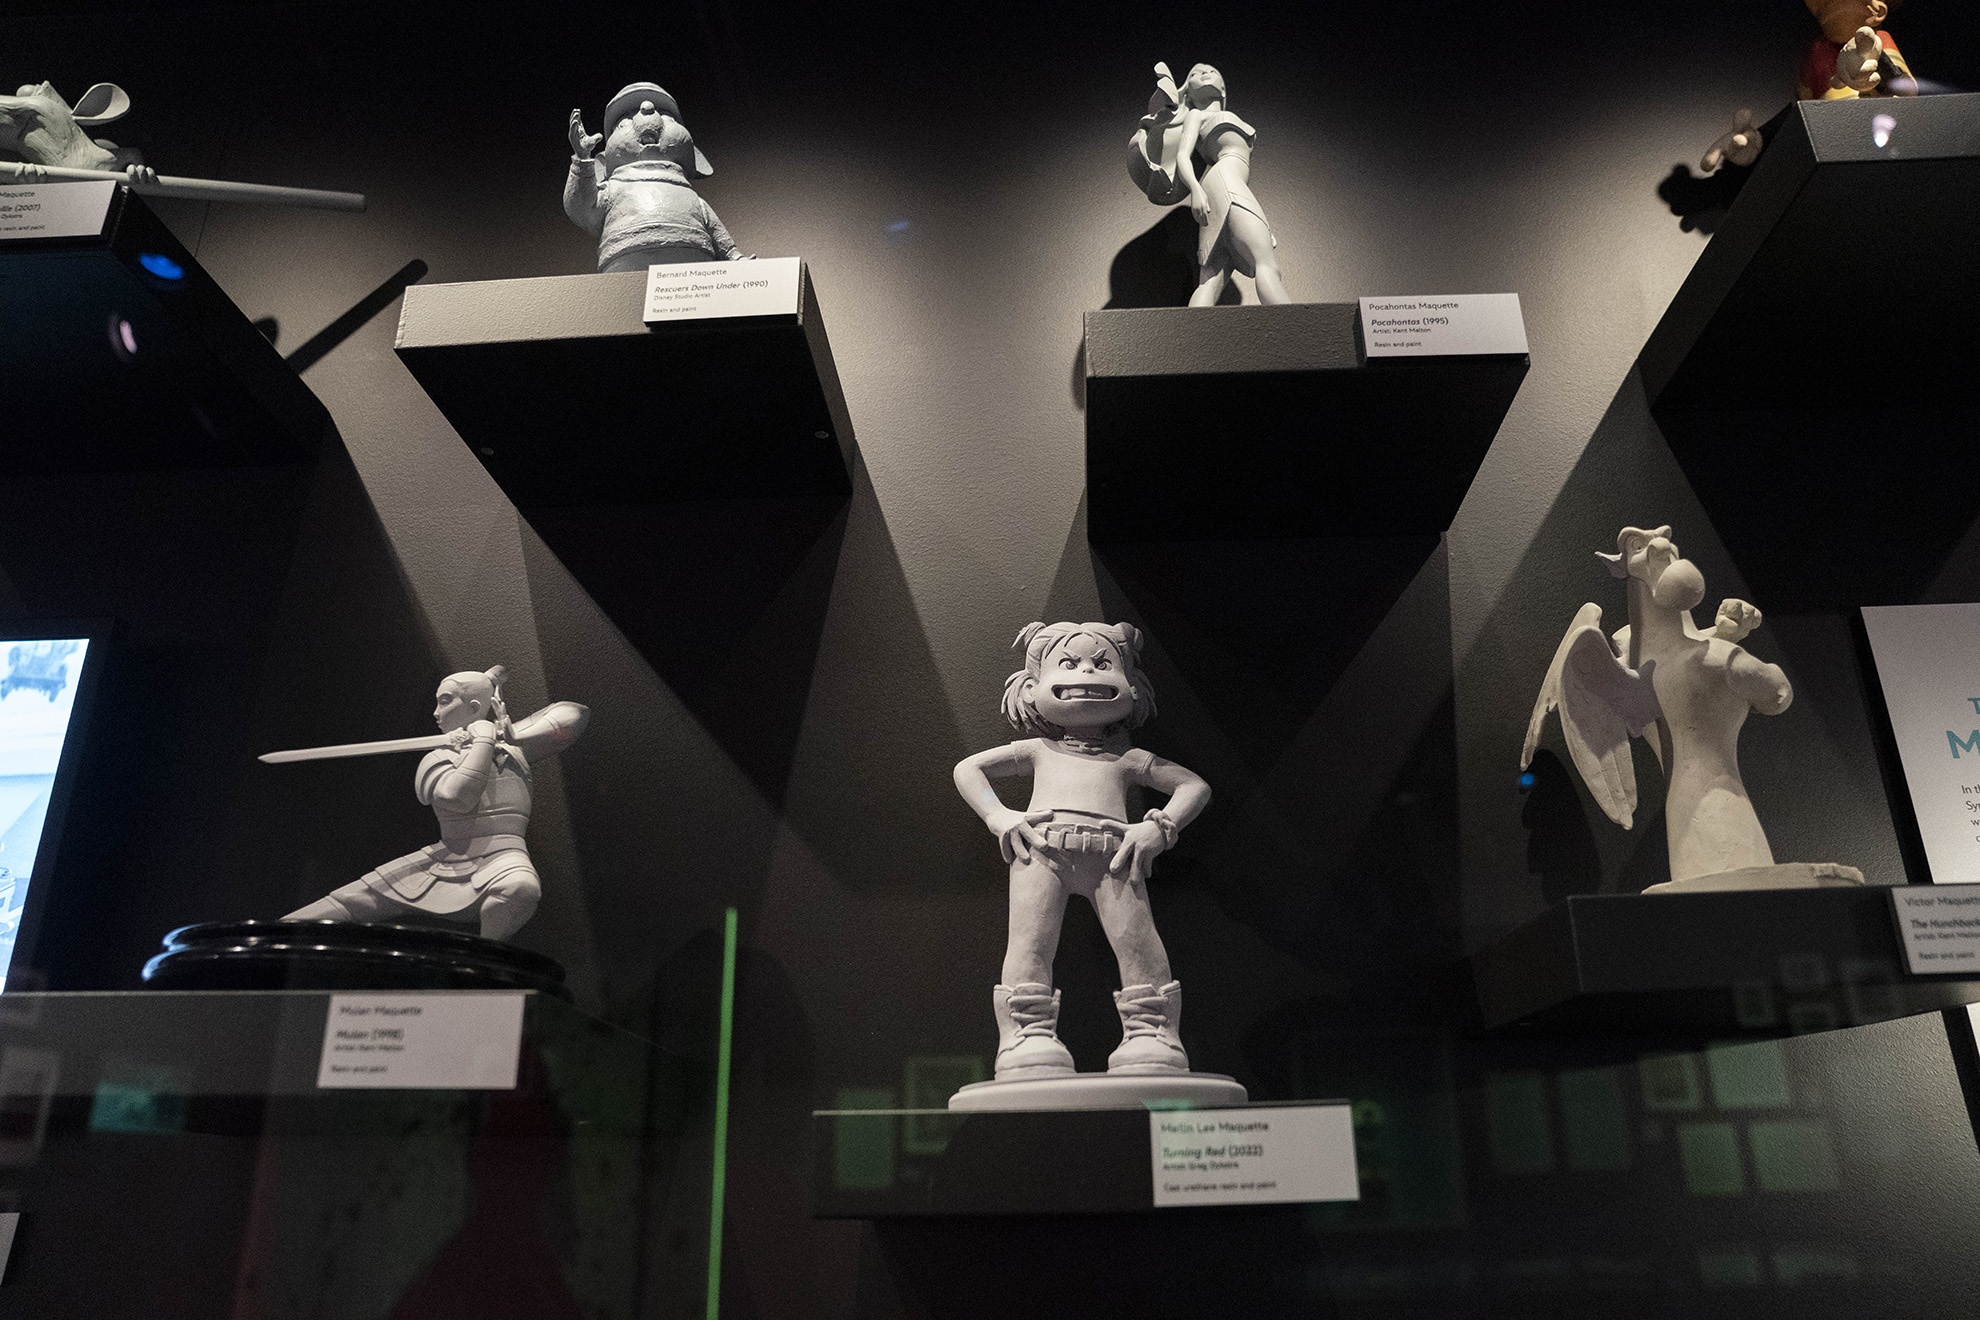 Animation maquettes display inside The Illusion of Life gallery at Disney100: The Exhibition, now open at The Franklin Institute in Philadelphia.